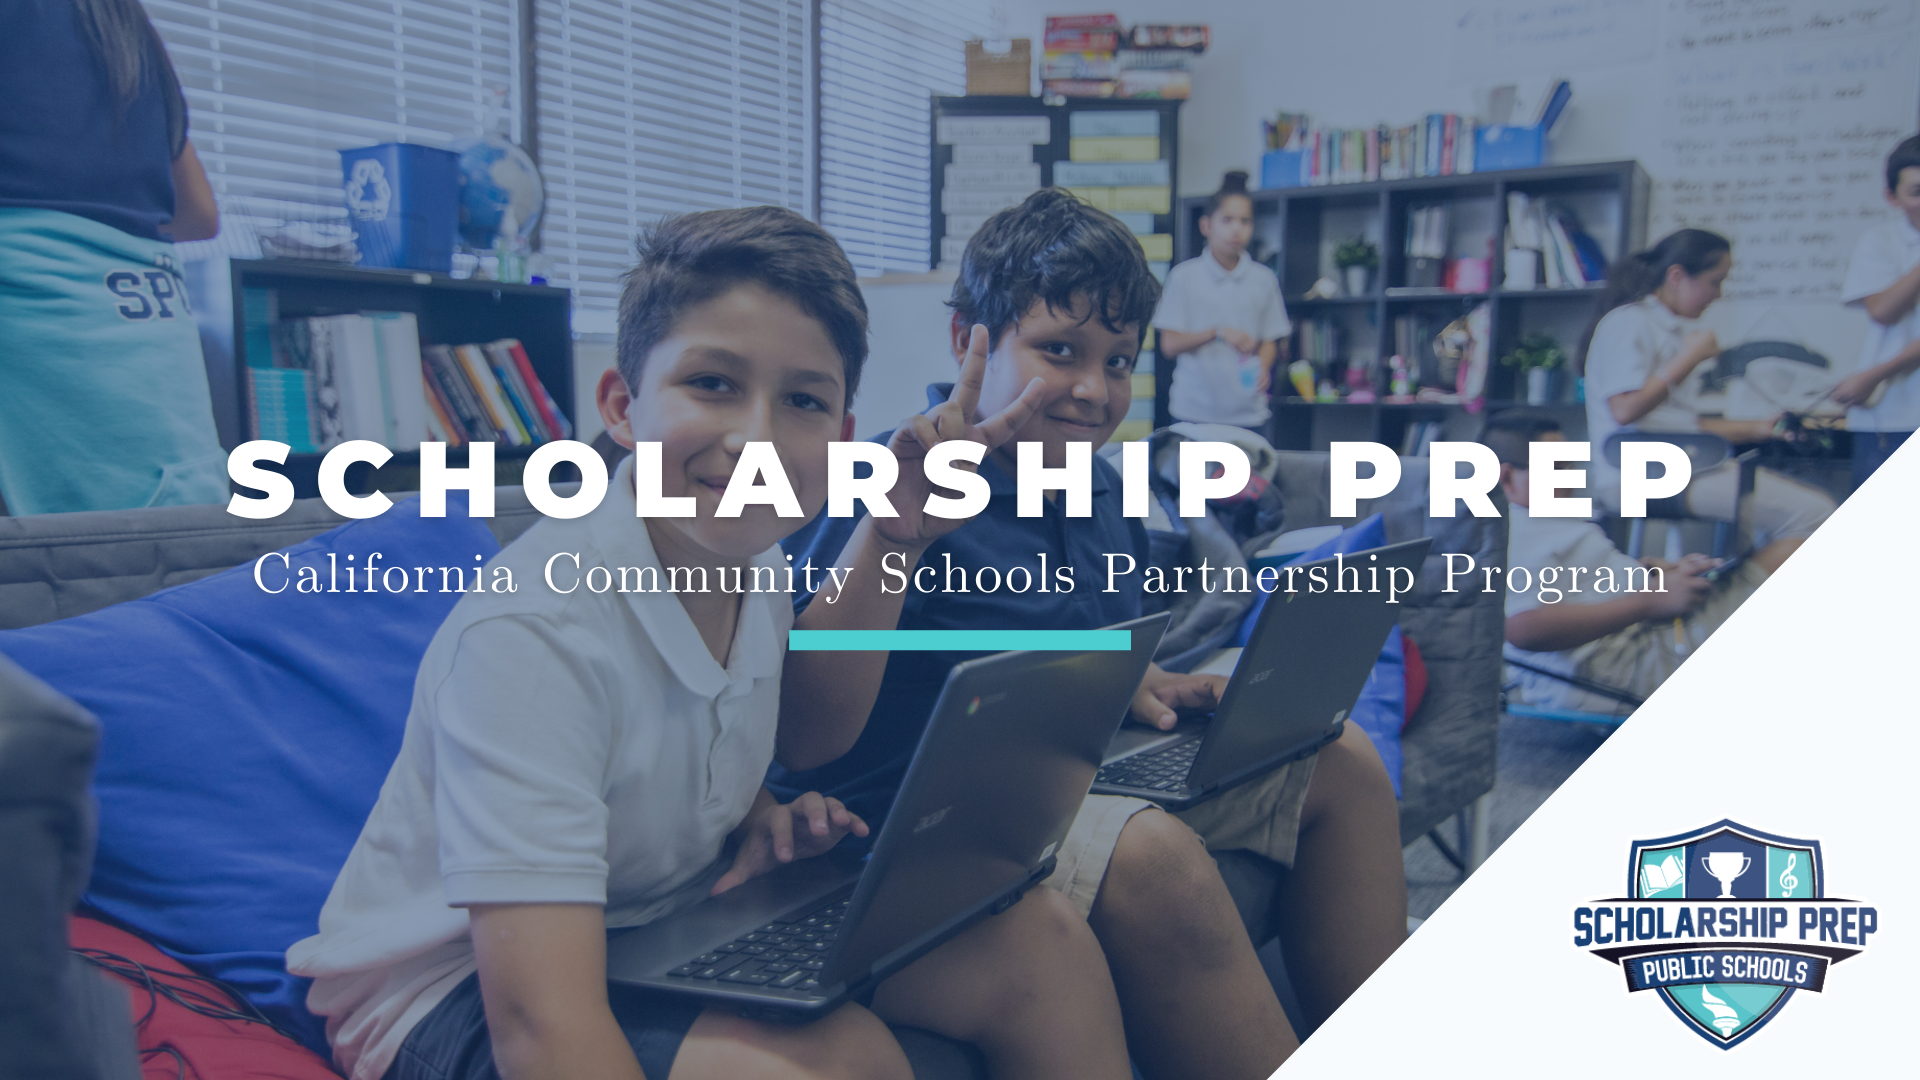 [INFOGRAPHIC] - How Scholarship Prep Allocated Grant Funds to Provide Additional Programs